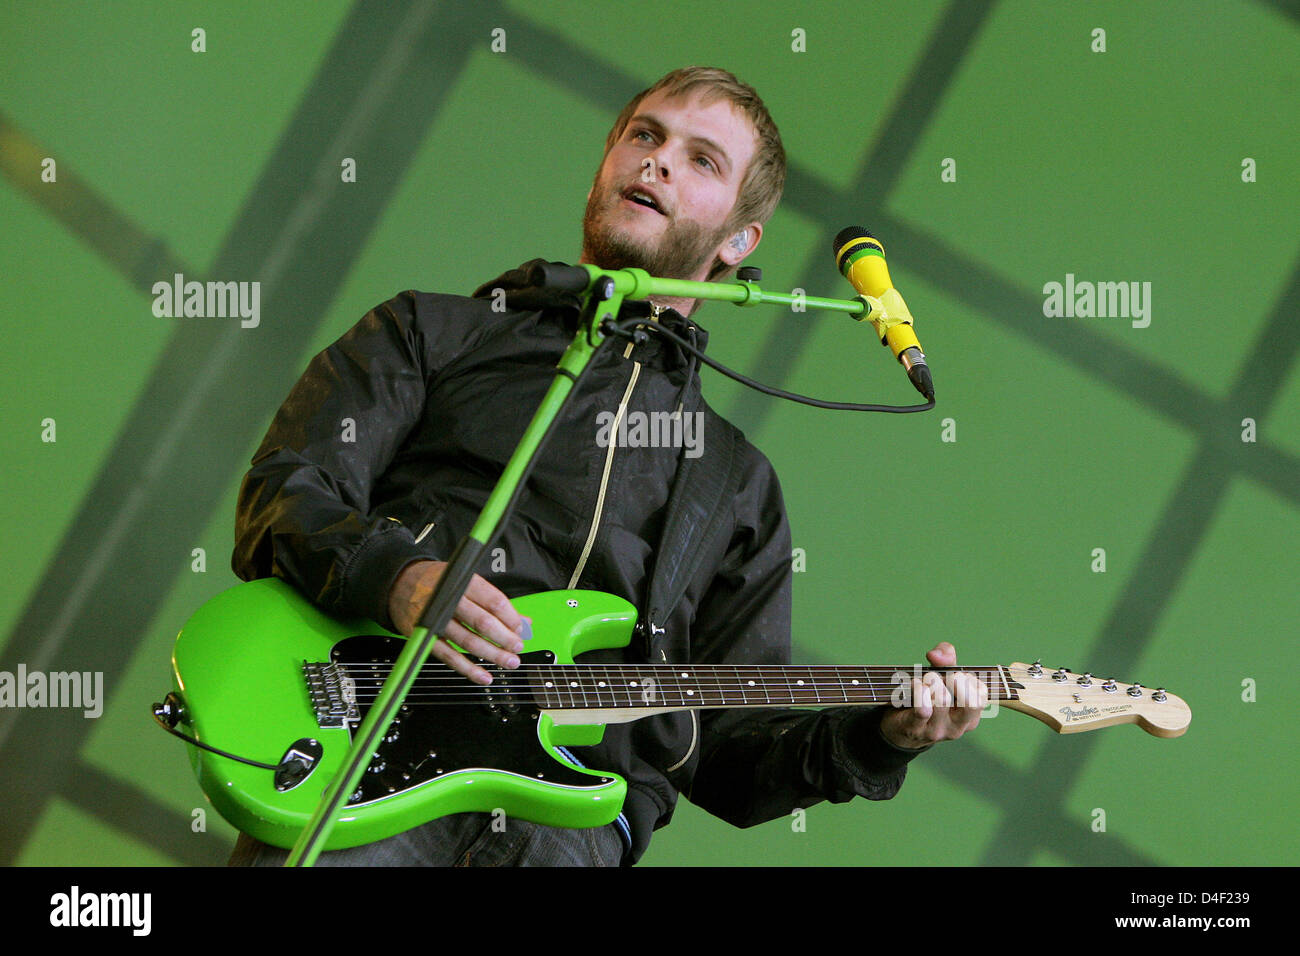 Singer and guitarist Peter Brugger of German band 'Sportfreunde Stiller' is pictured during his performance at open air festival 'Rock im Park' in Nuremberg, Germany, 06 June 2008. The biggest music festival of Southern Germany started the same day with sunny weather. Modern and classical rock music on three stages will be presented by 92 performers till 08 June 2008. Photo: Daniel Stock Photo